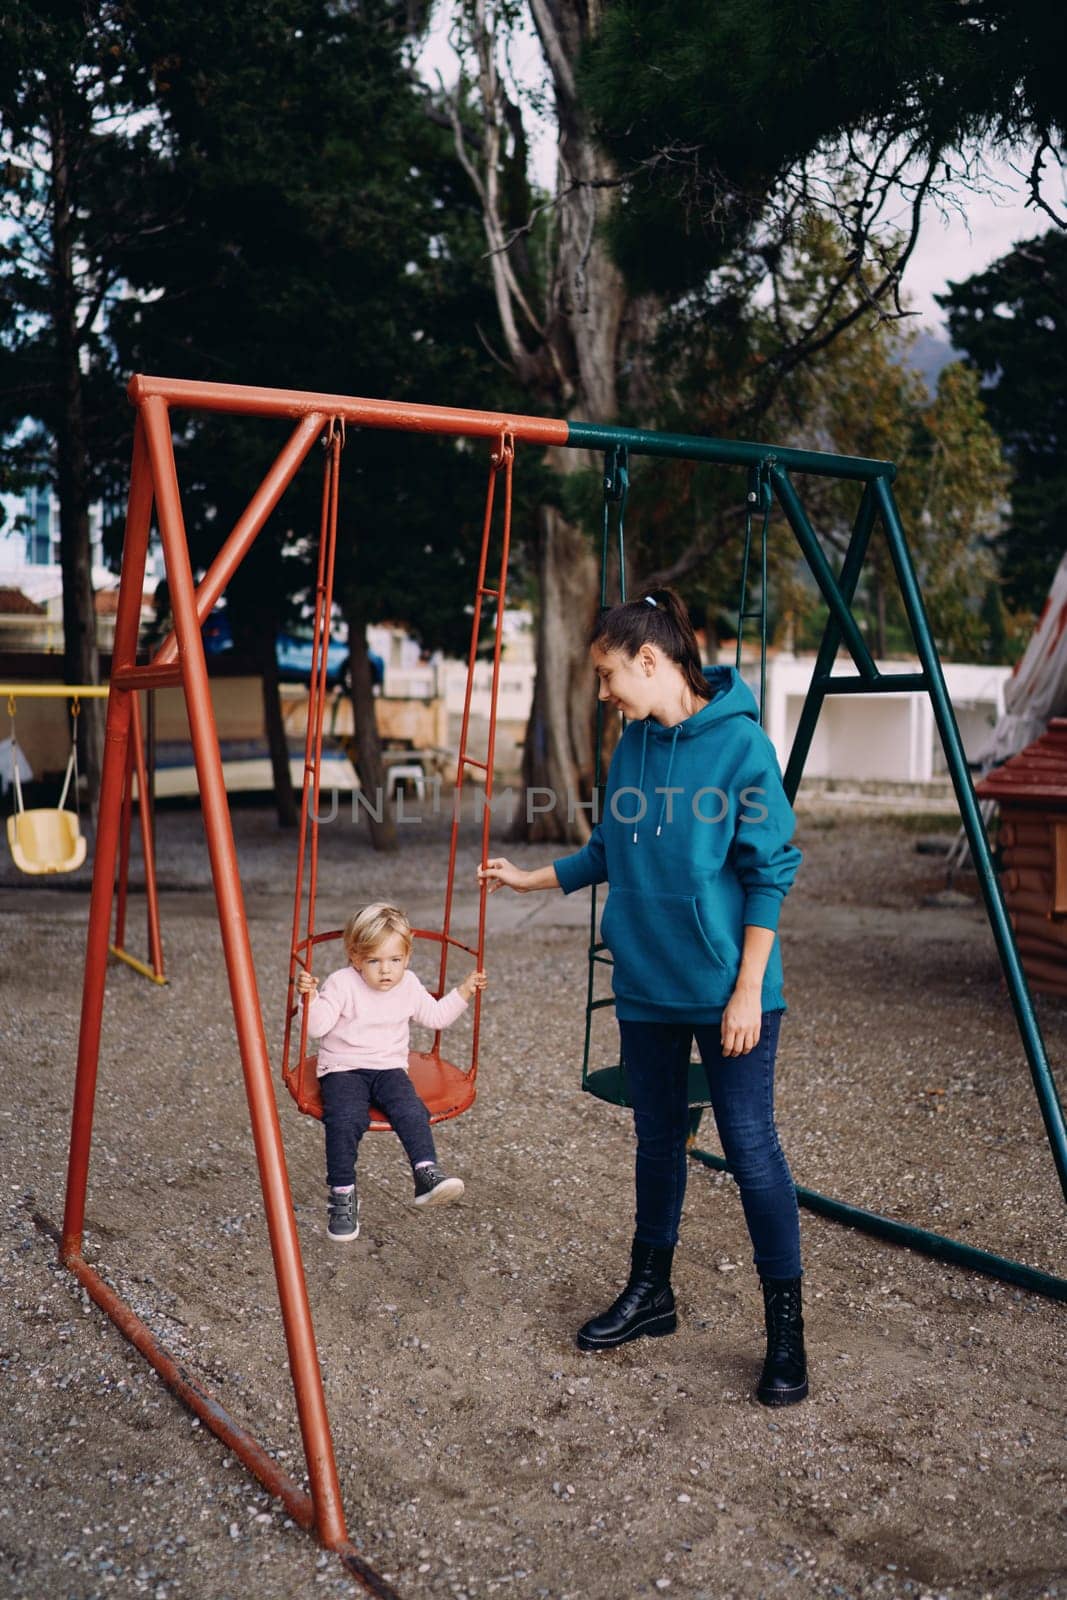 Mom stands next to the swing on the playground, with a little girl sitting on it by Nadtochiy